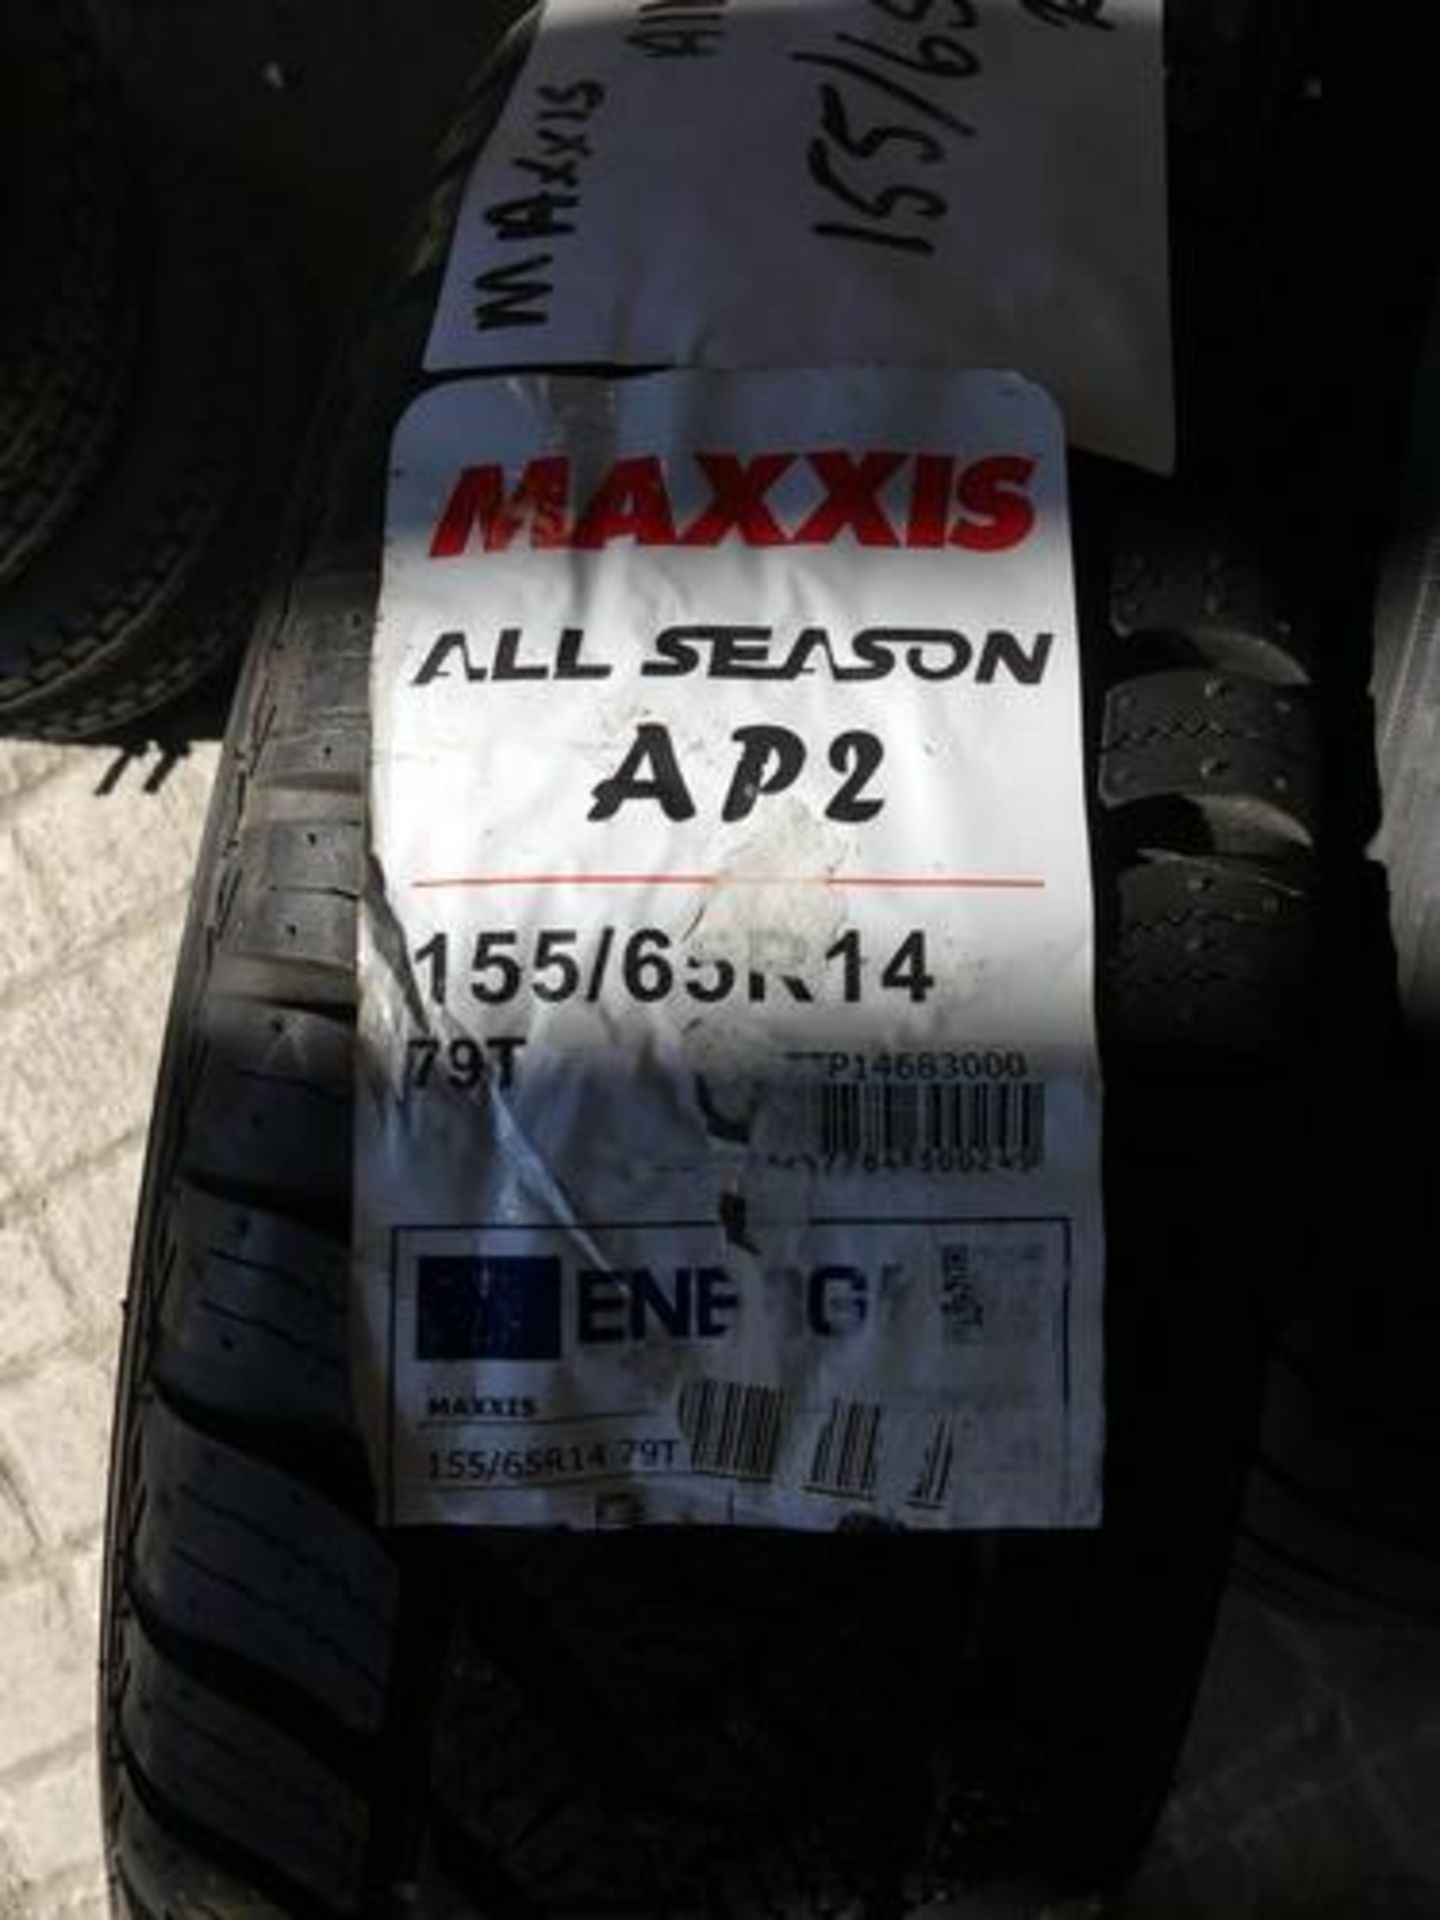 1 x Maxxis All Season AP2 tyre, size 155/65R14 - New with label (pallet 6)